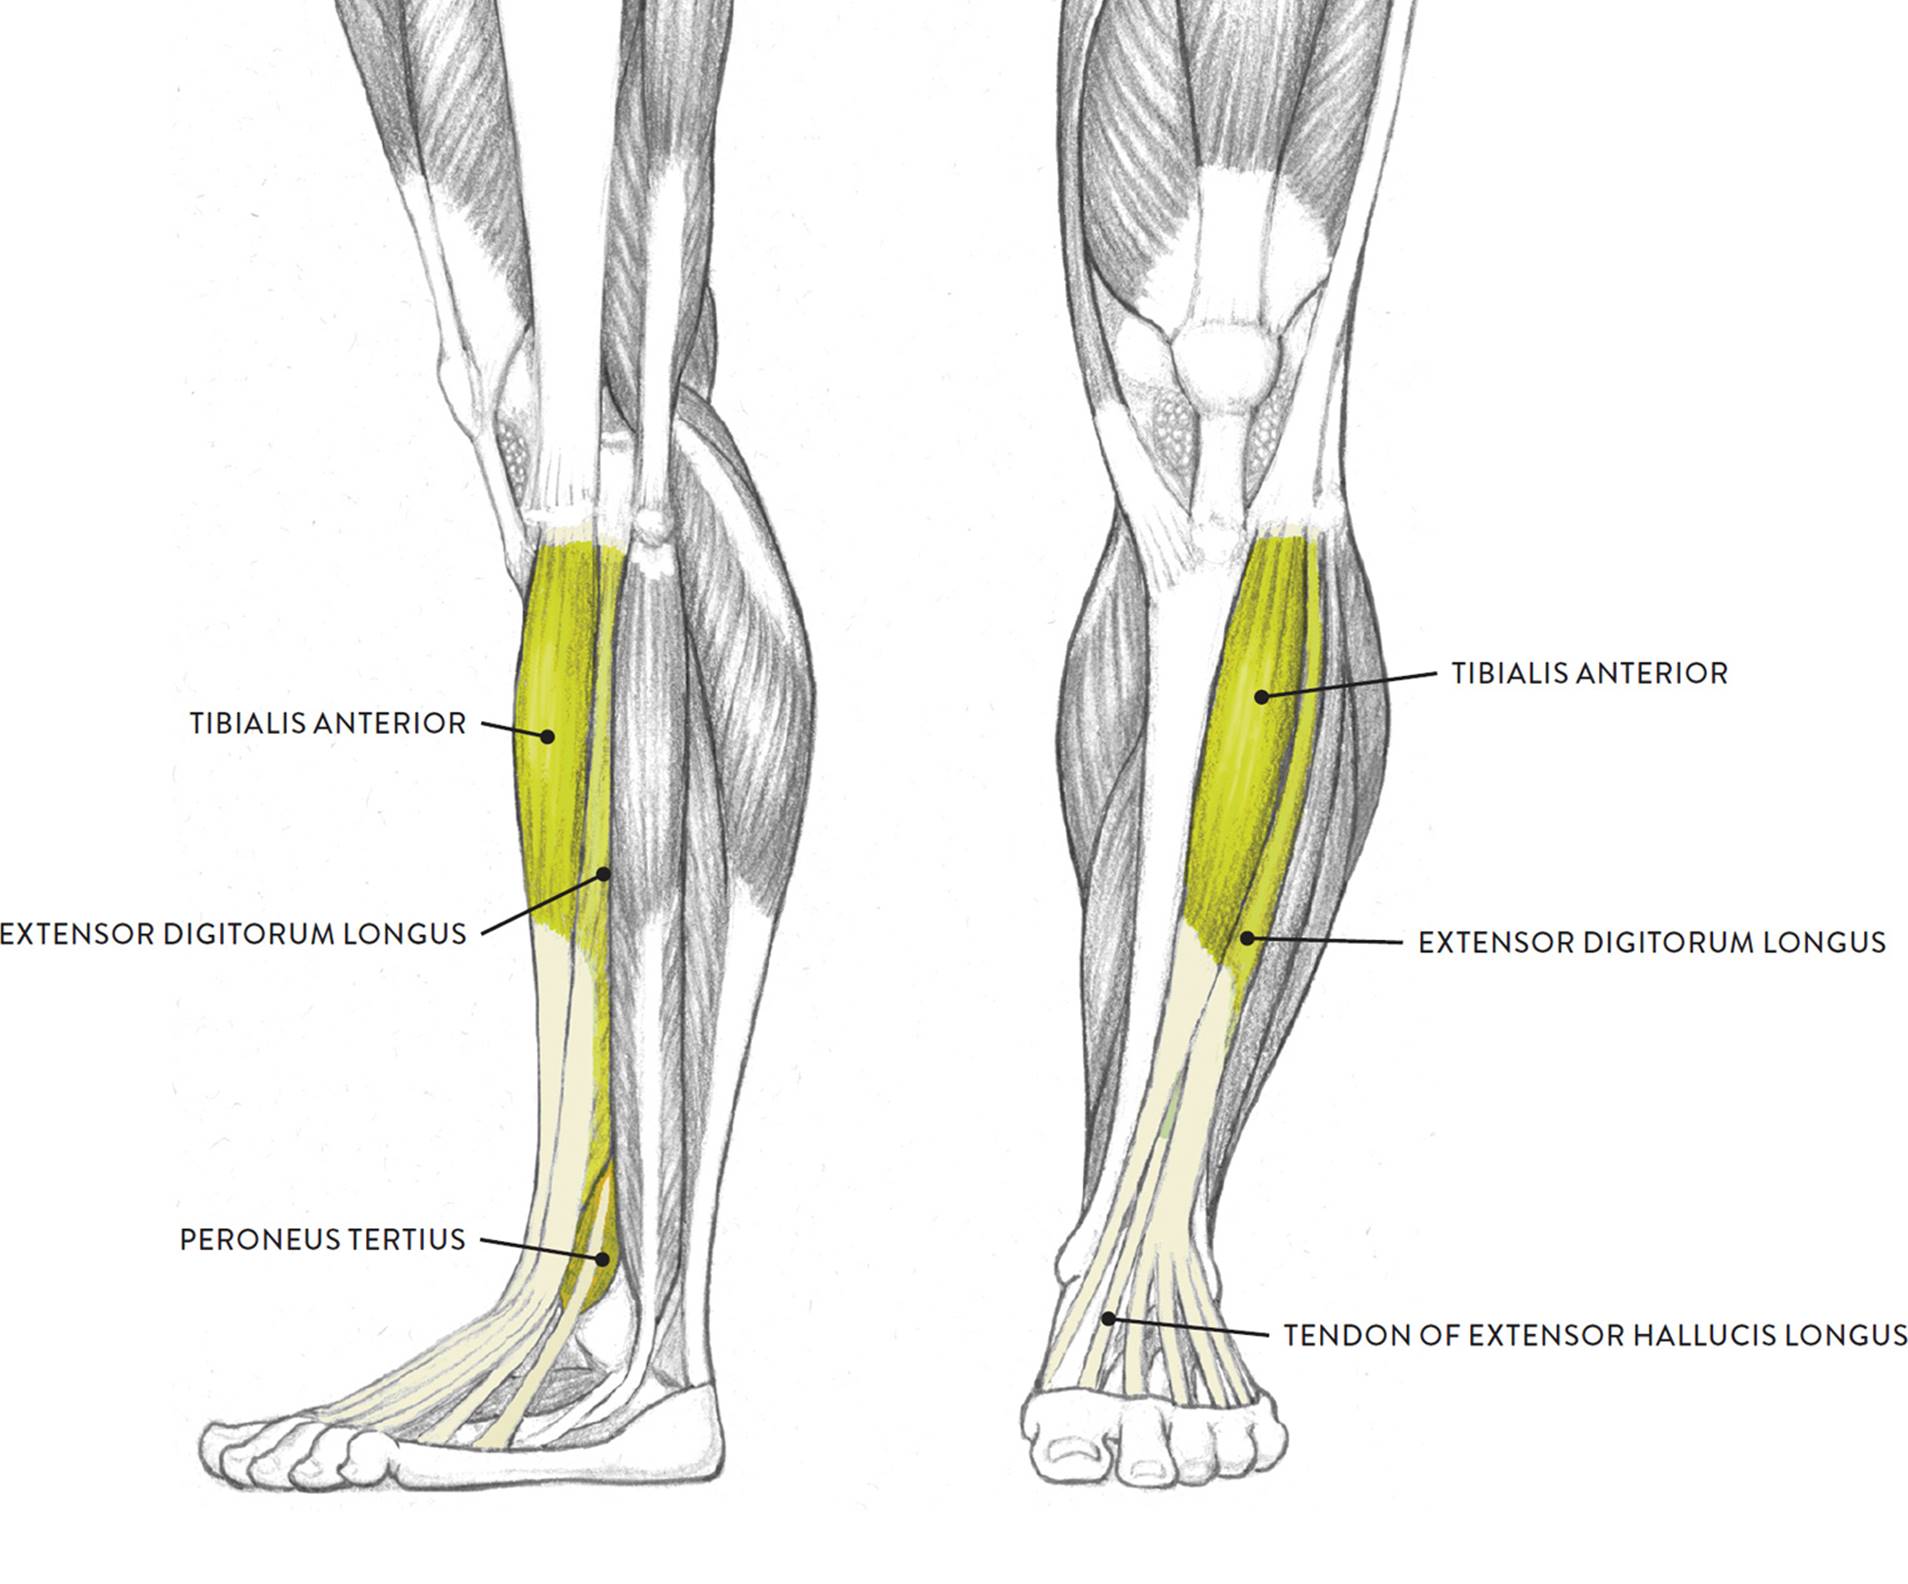 Muscles of the Leg and Foot - Classic Human Anatomy in ...